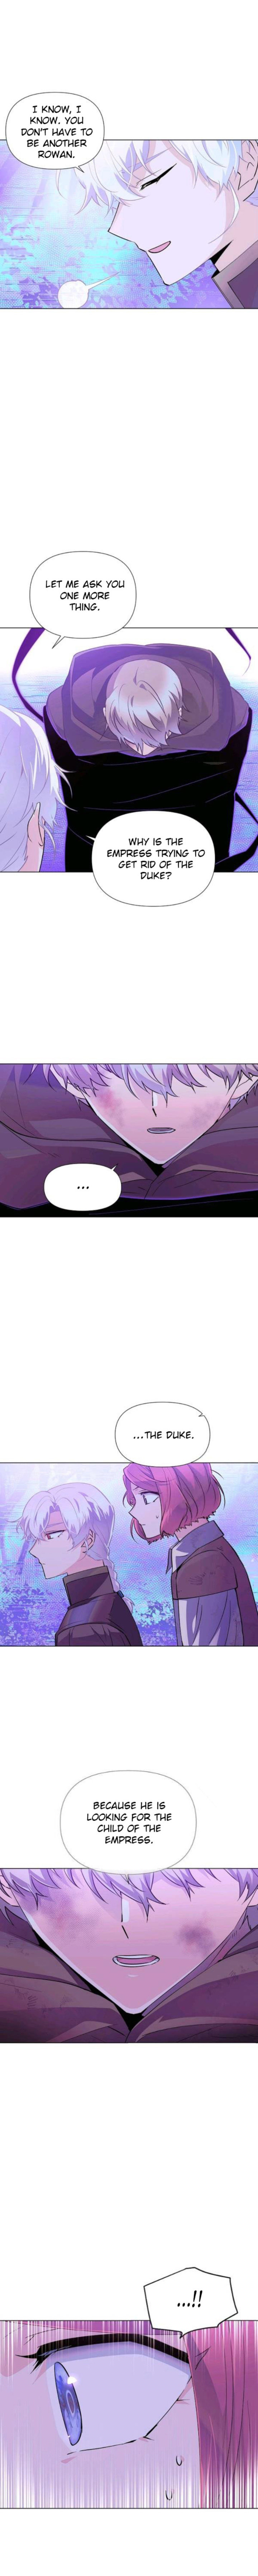 The Villain Discovered My Identity - Chapter 63 Page 13